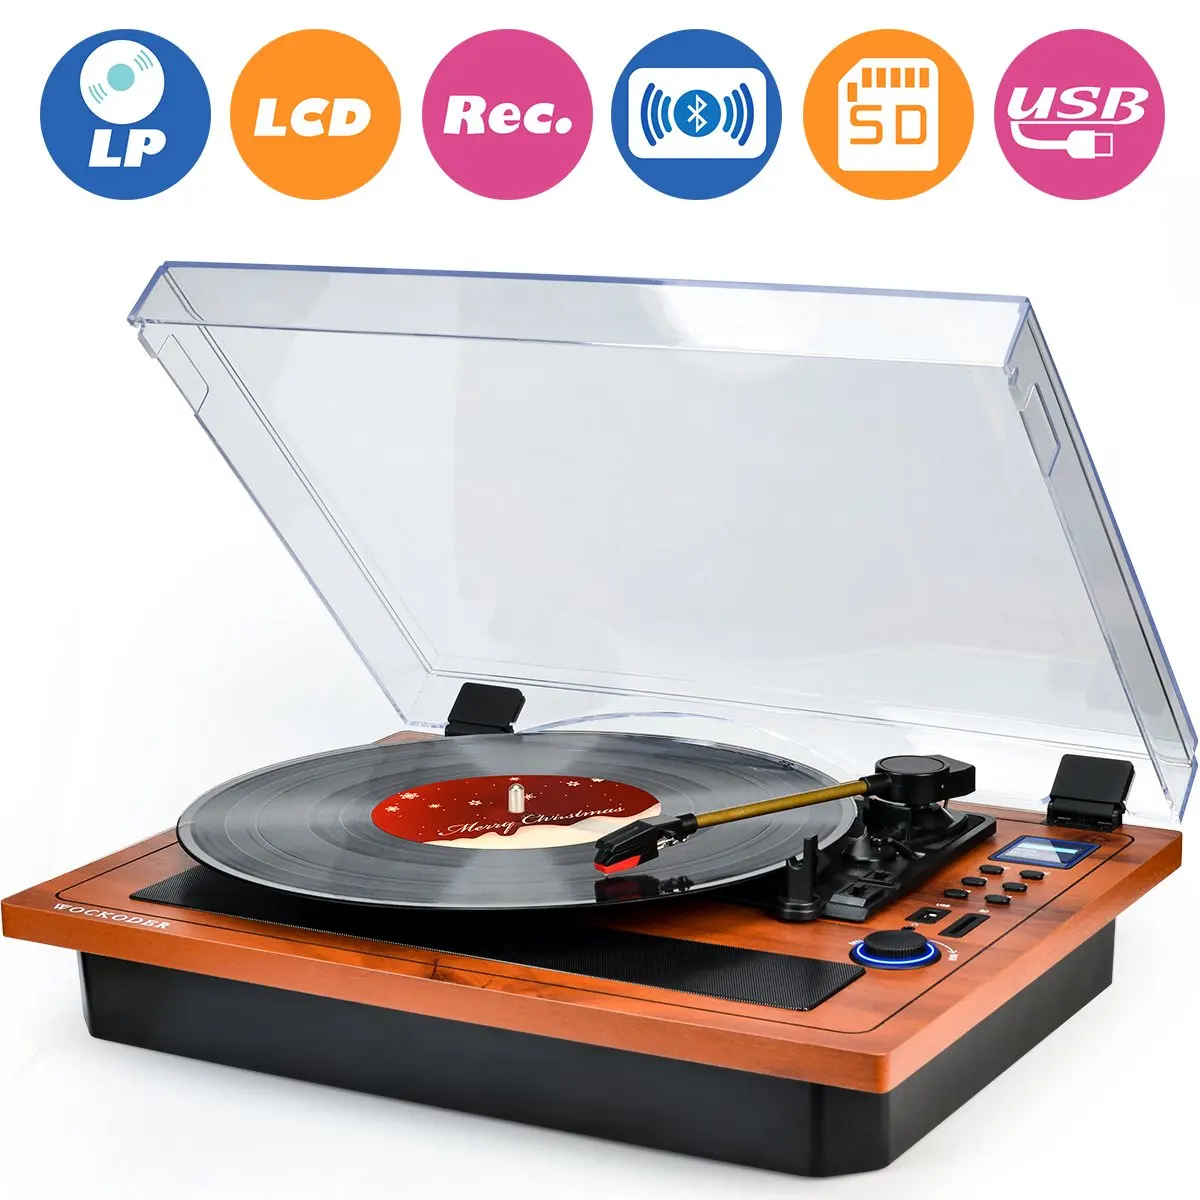 Buy Turntable Vinyl Record Player Wireless Bluetooth In & Out Record Player Built in Stereo